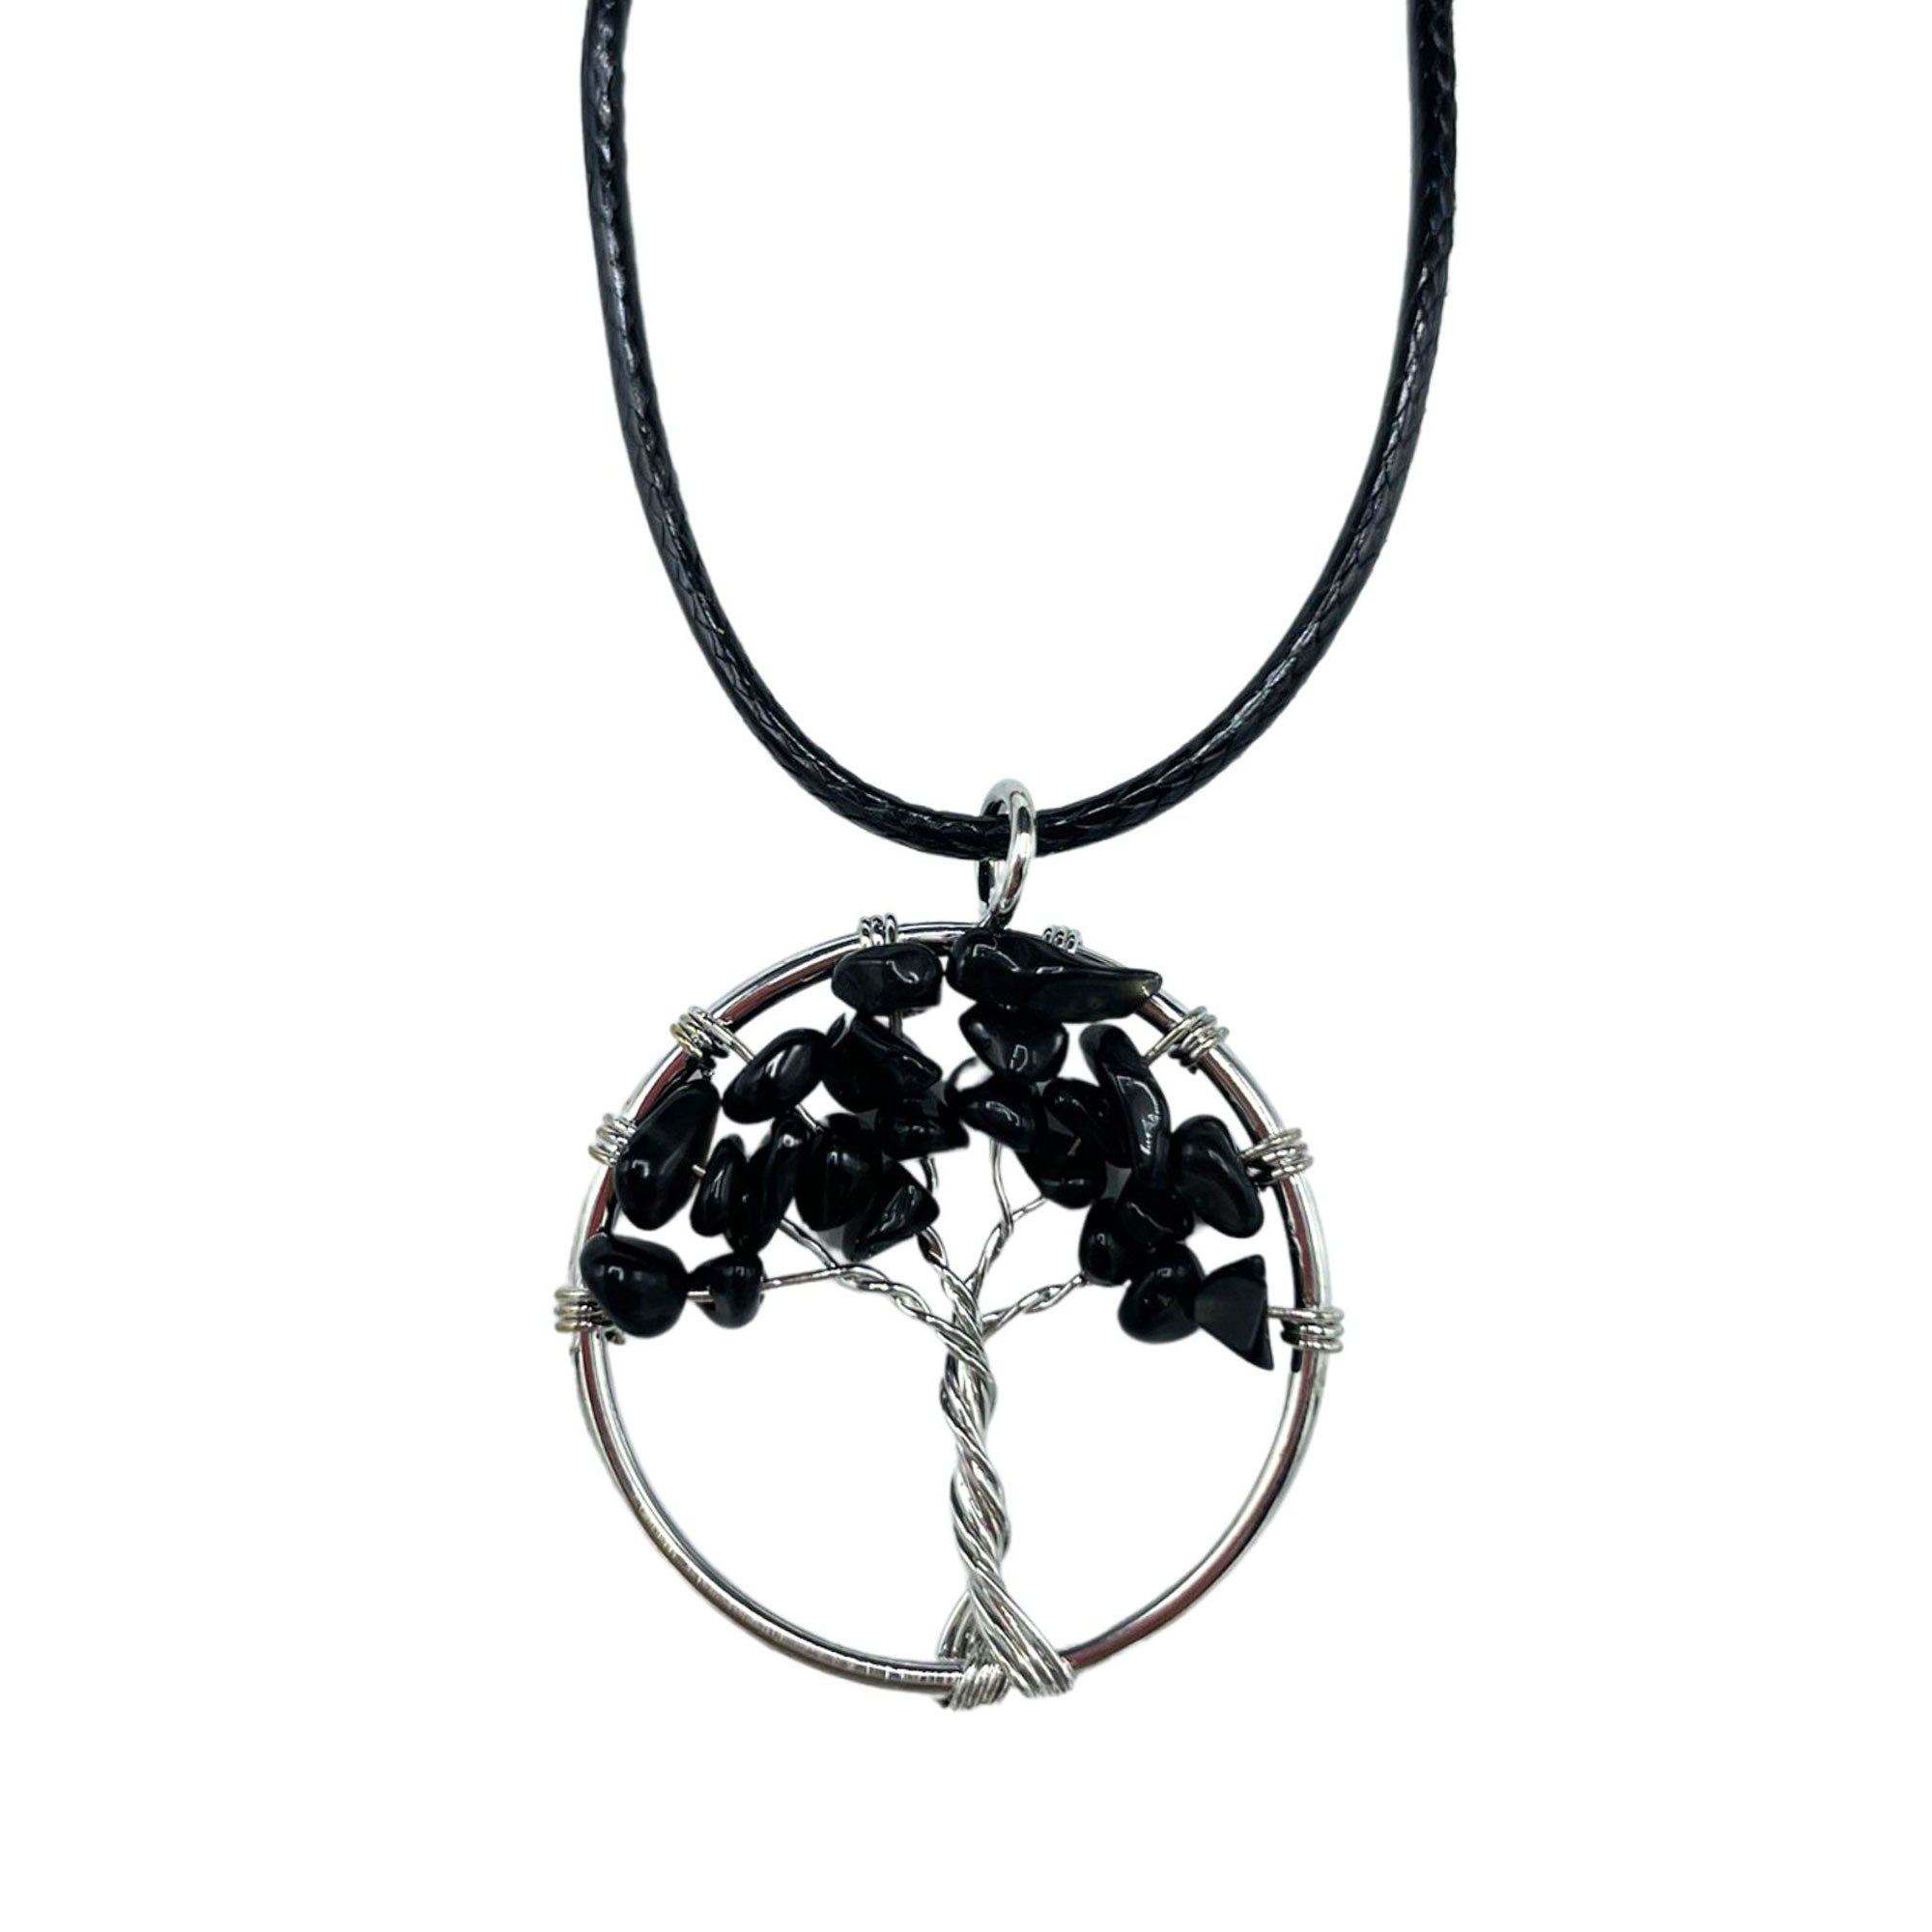 View Tree of Life Pendant Black Agate information